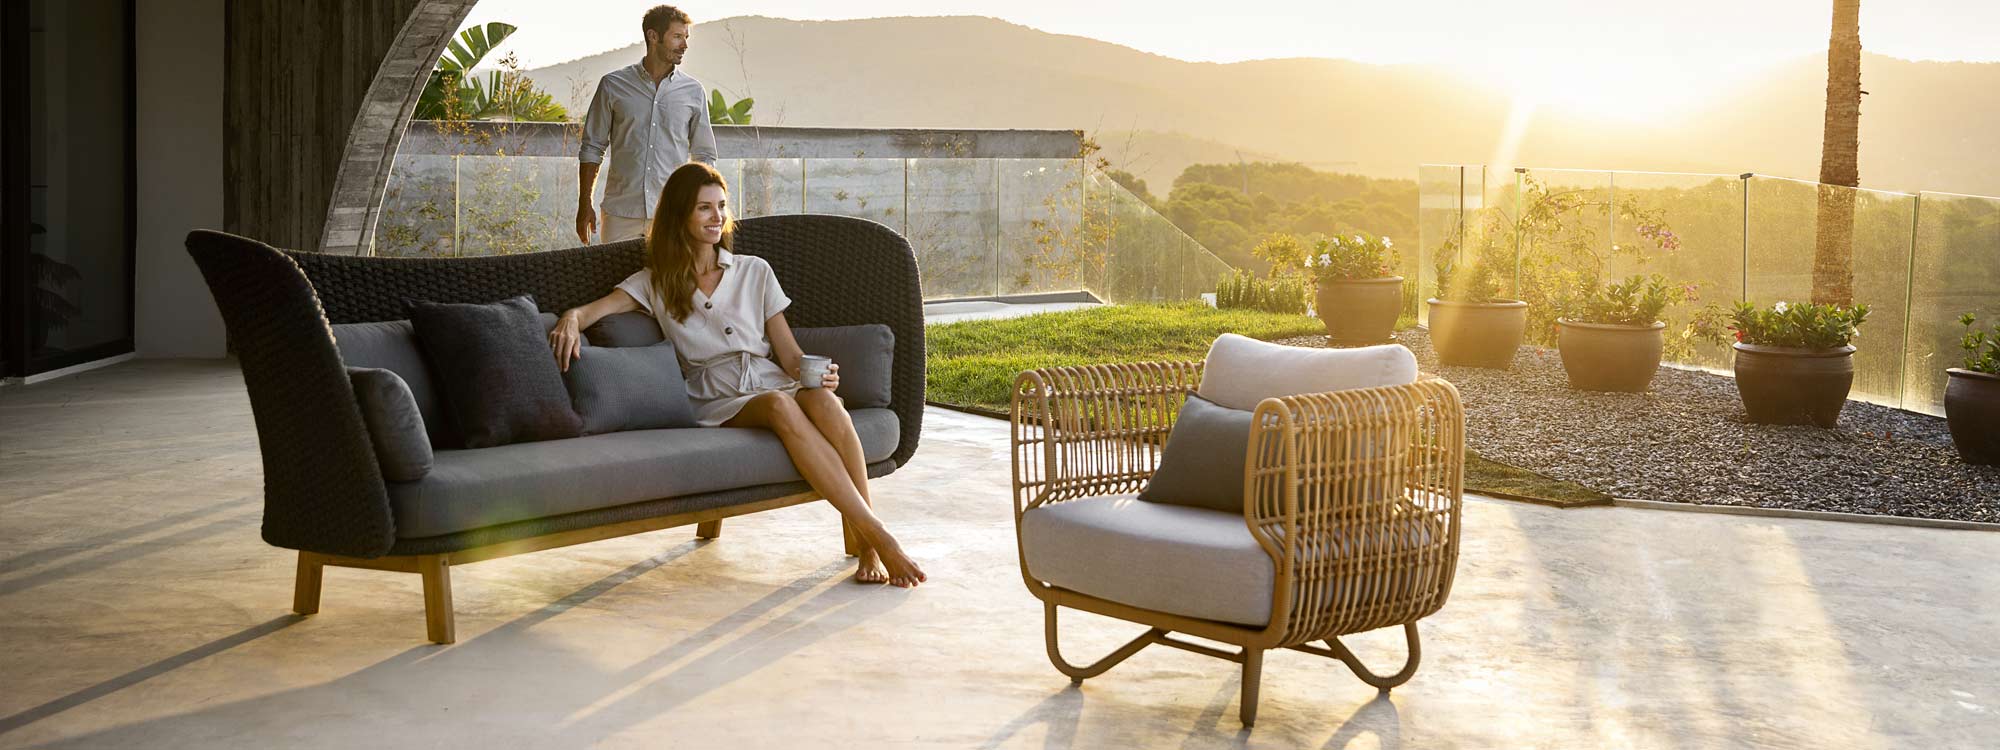 Image of woman sat in Caneline Peacock Wing sofa on terrace in setting sun